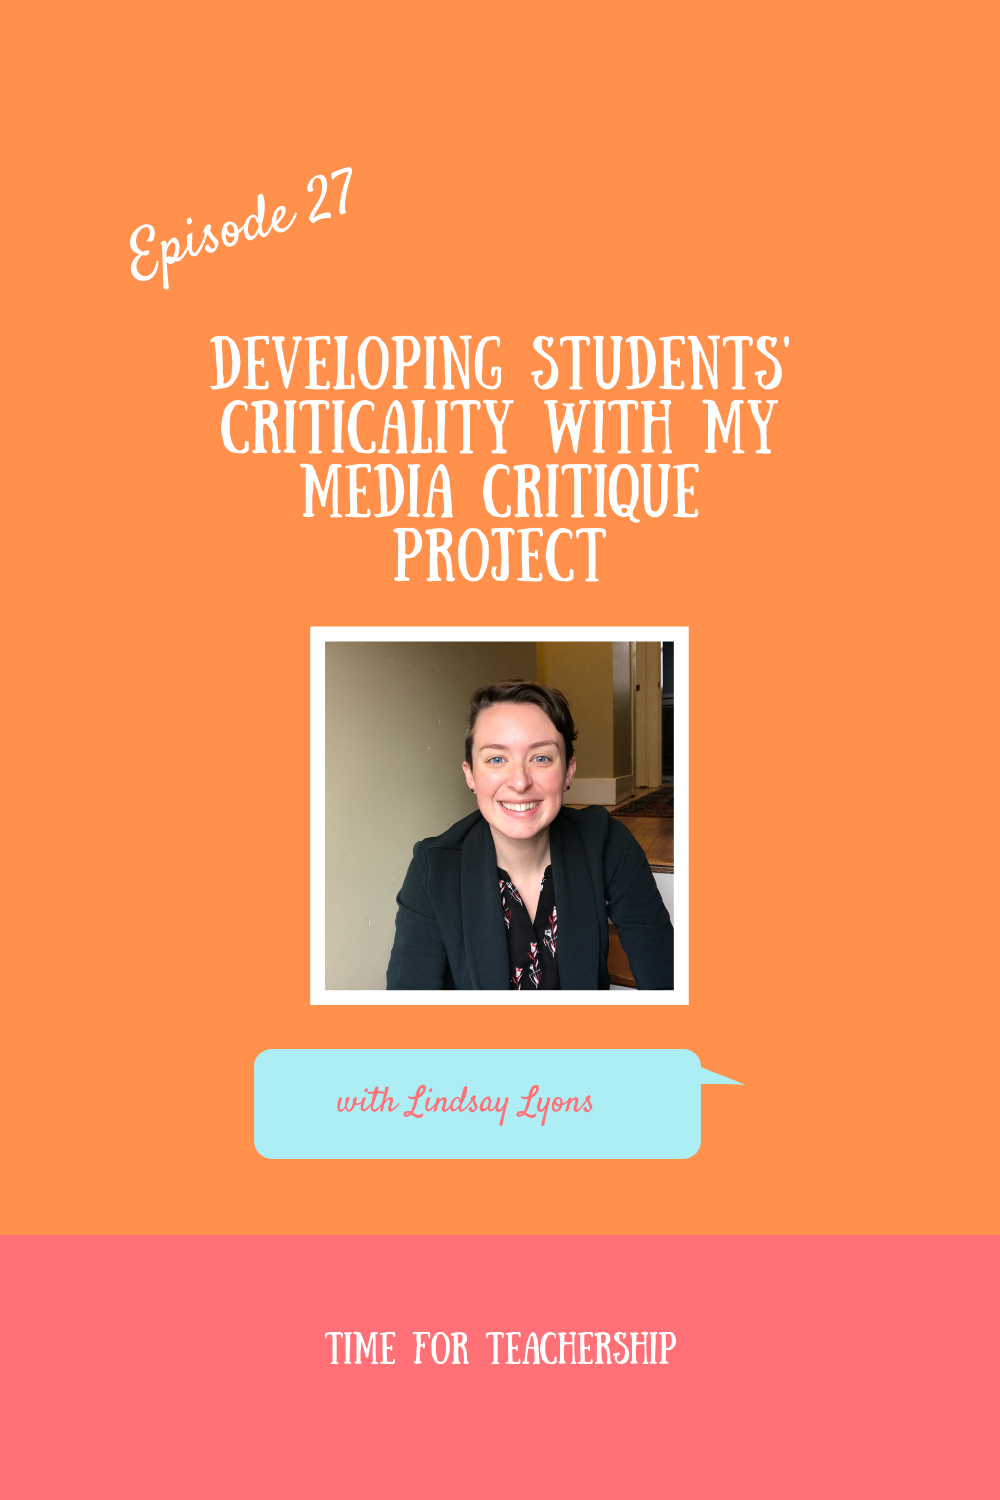 In this episode, I'm giving you a peek into my famous Media Critique Project! I talk about the inspiration for it, the framework, driving questions, and the creativity that students have approached this with. Make sure you grab the Project breakdown document so that you can share this with your own students. They're going to love it!